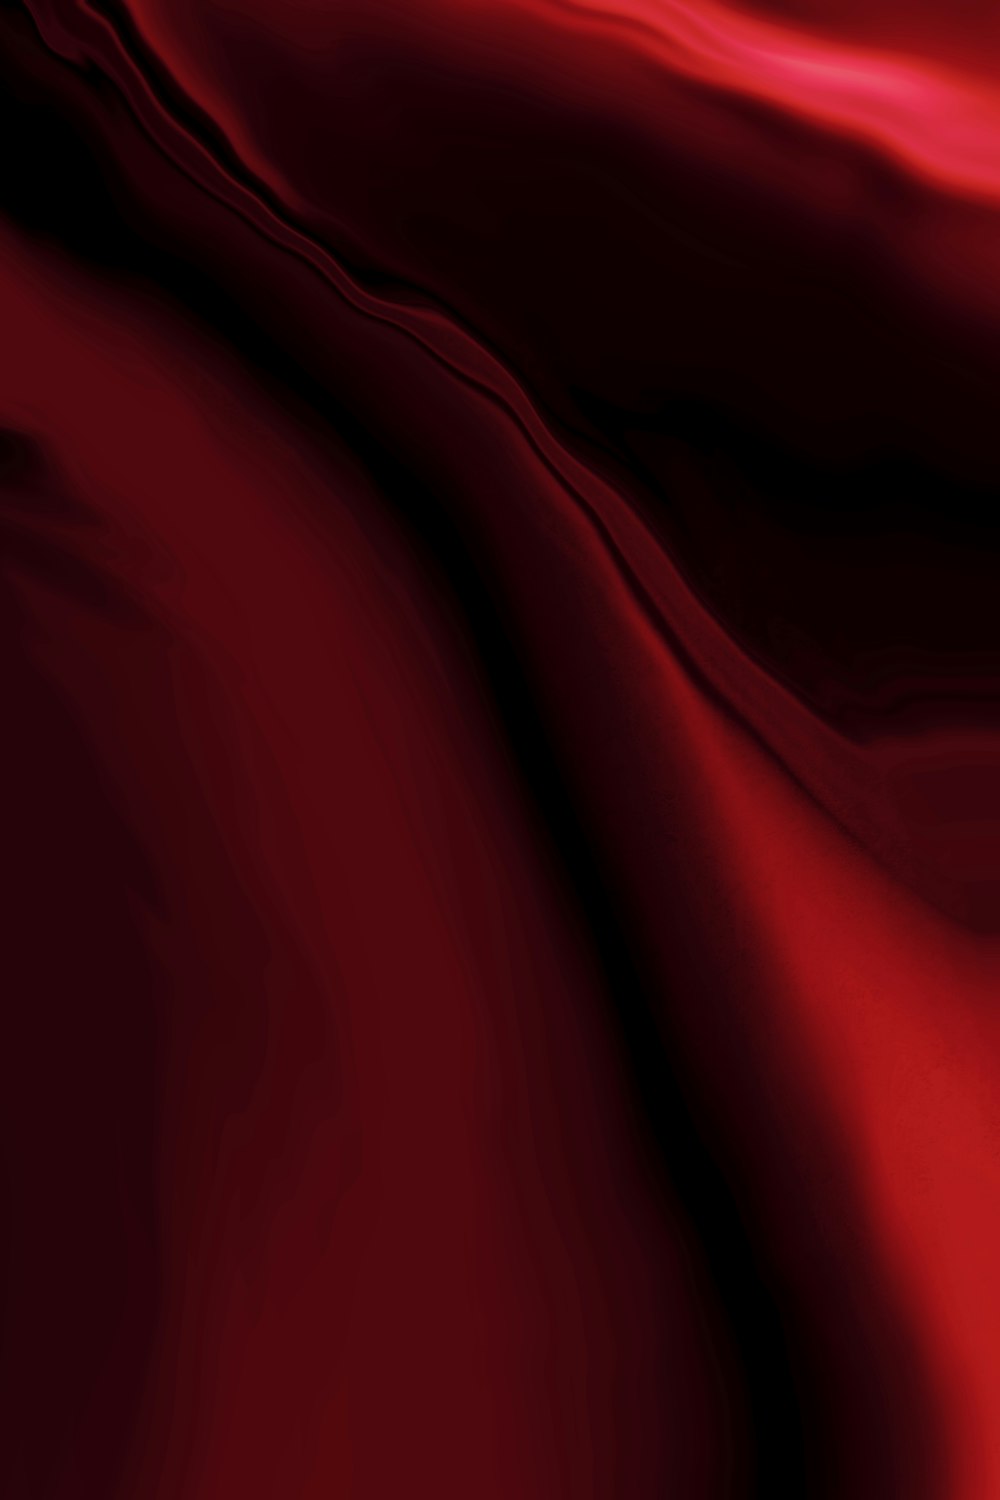 a close up of a red satin material